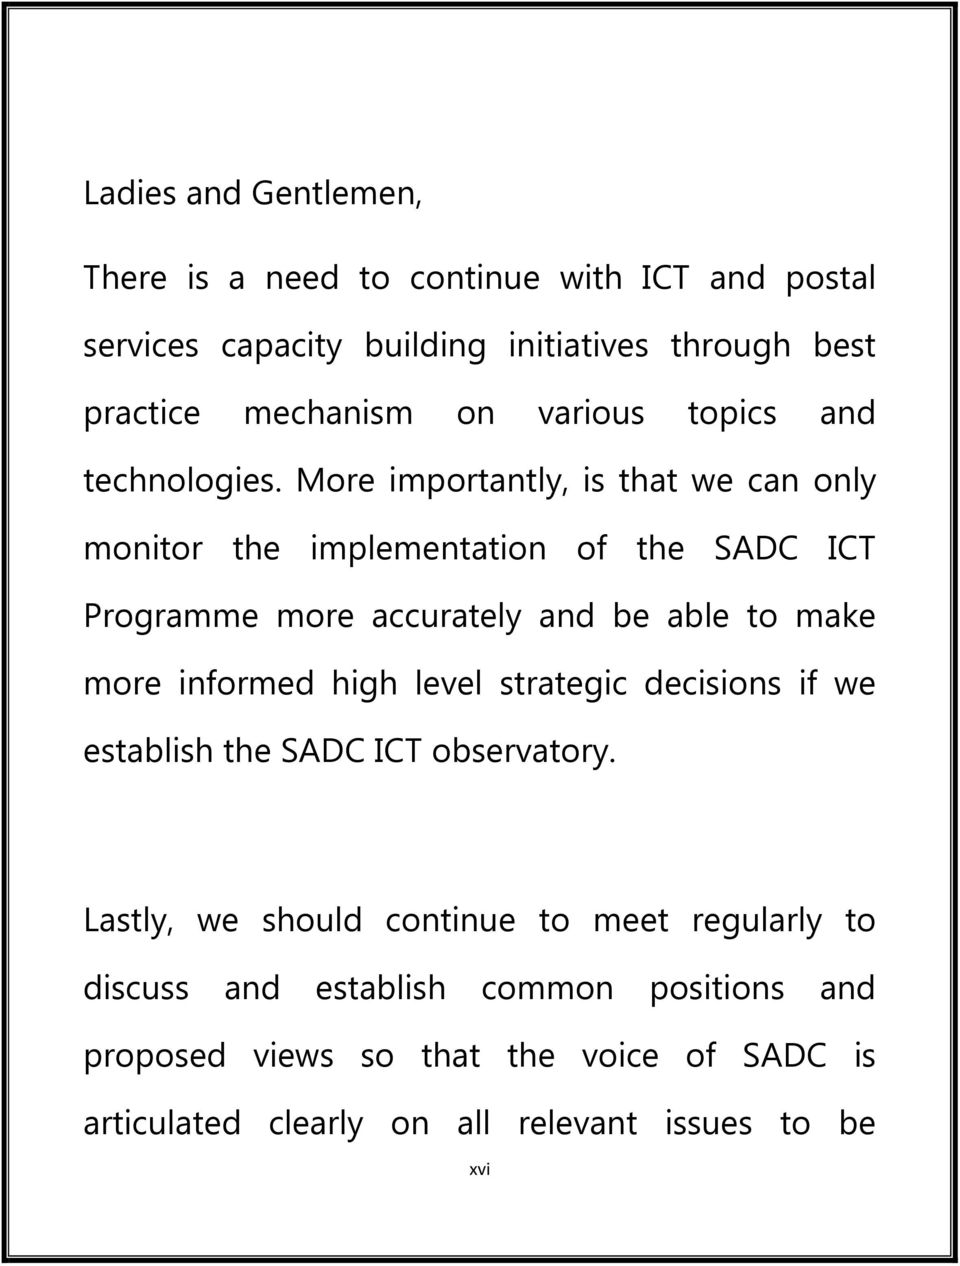 More importantly, is that we can only monitor the implementation of the SADC ICT Programme more accurately and be able to make more informed